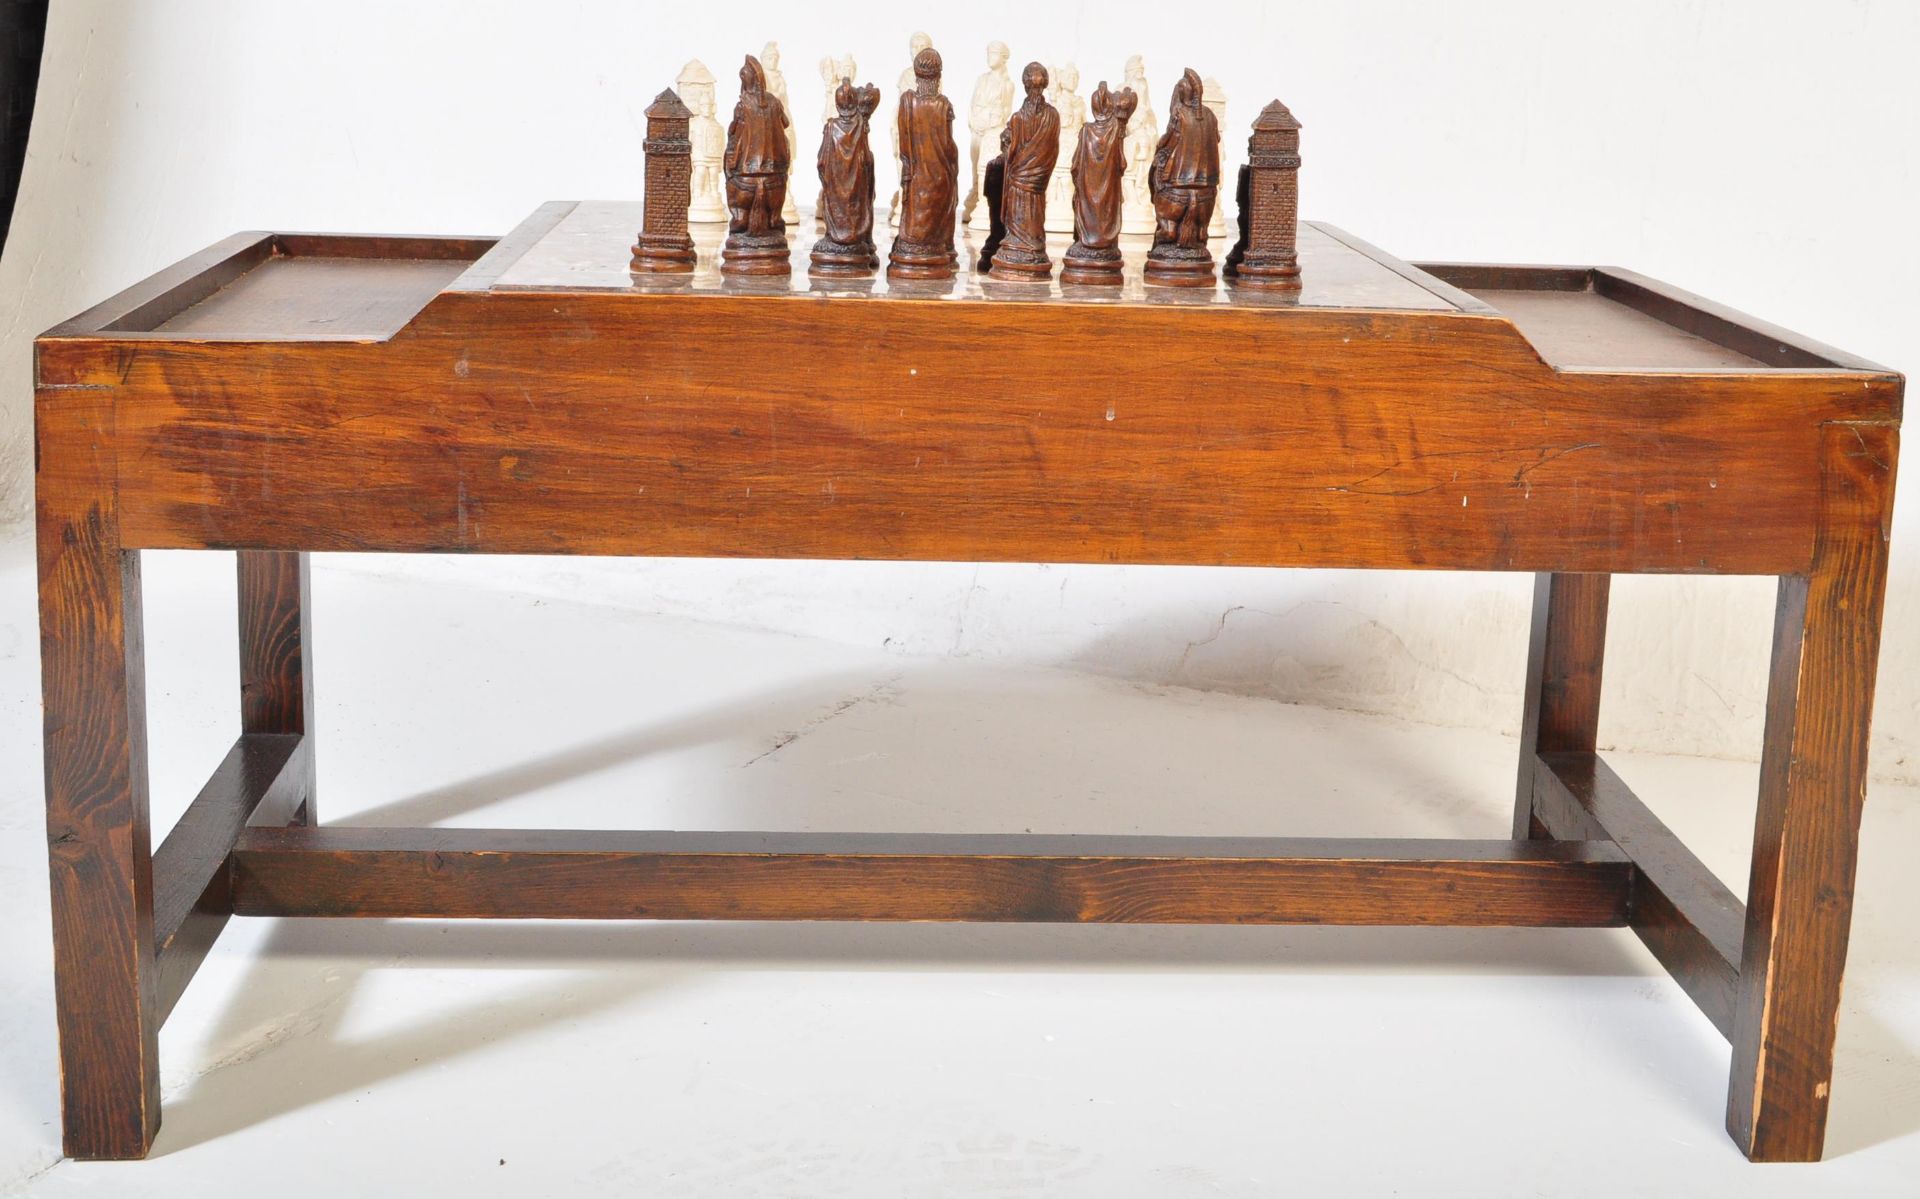 VINTAGE WOOD CUSTOM CHESS BOARD GAME TABLE - Image 3 of 6